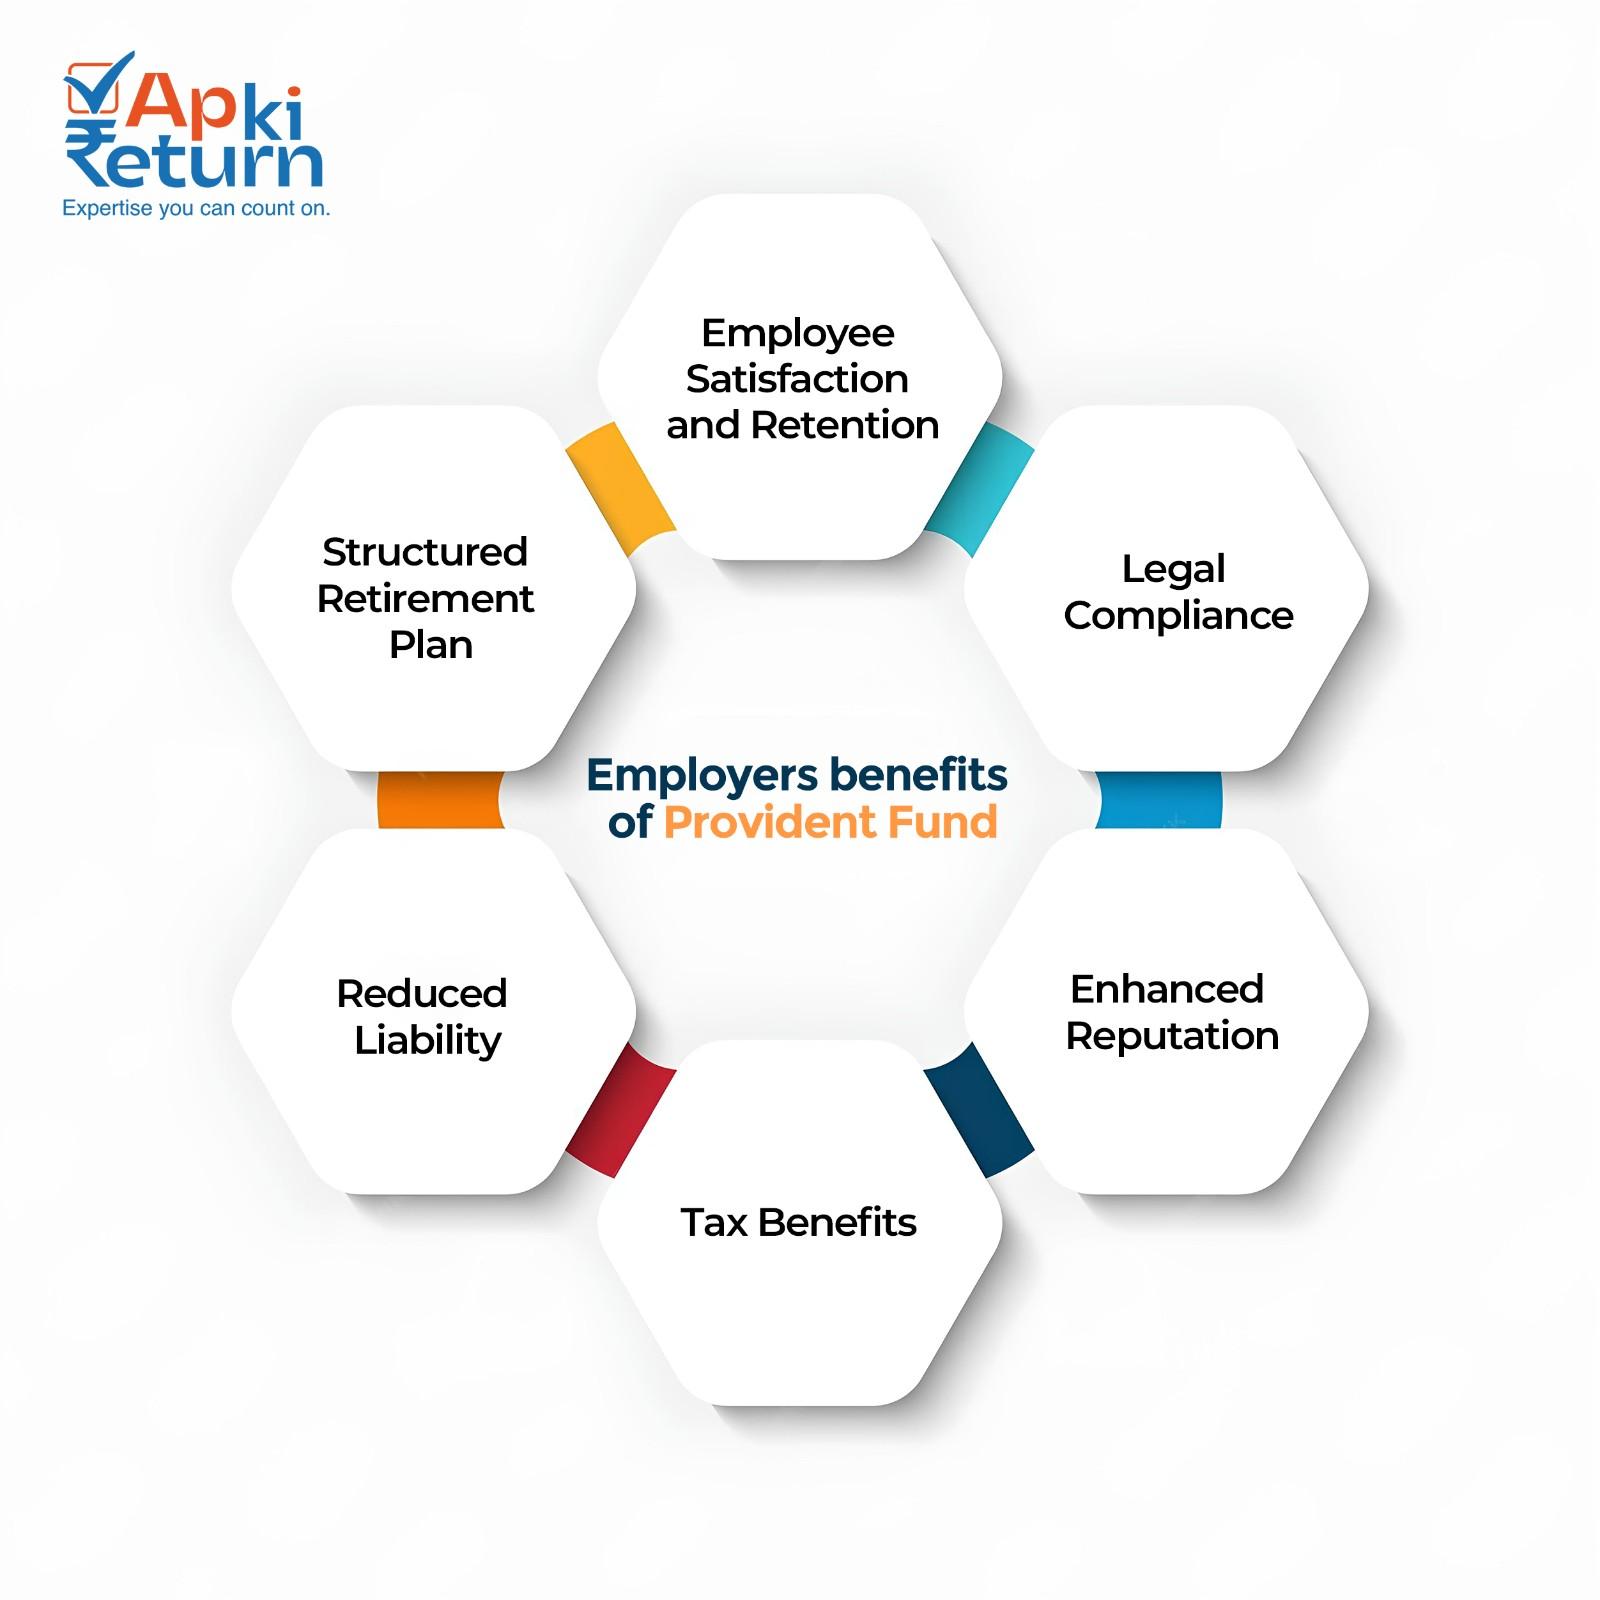 Benefits for Employers